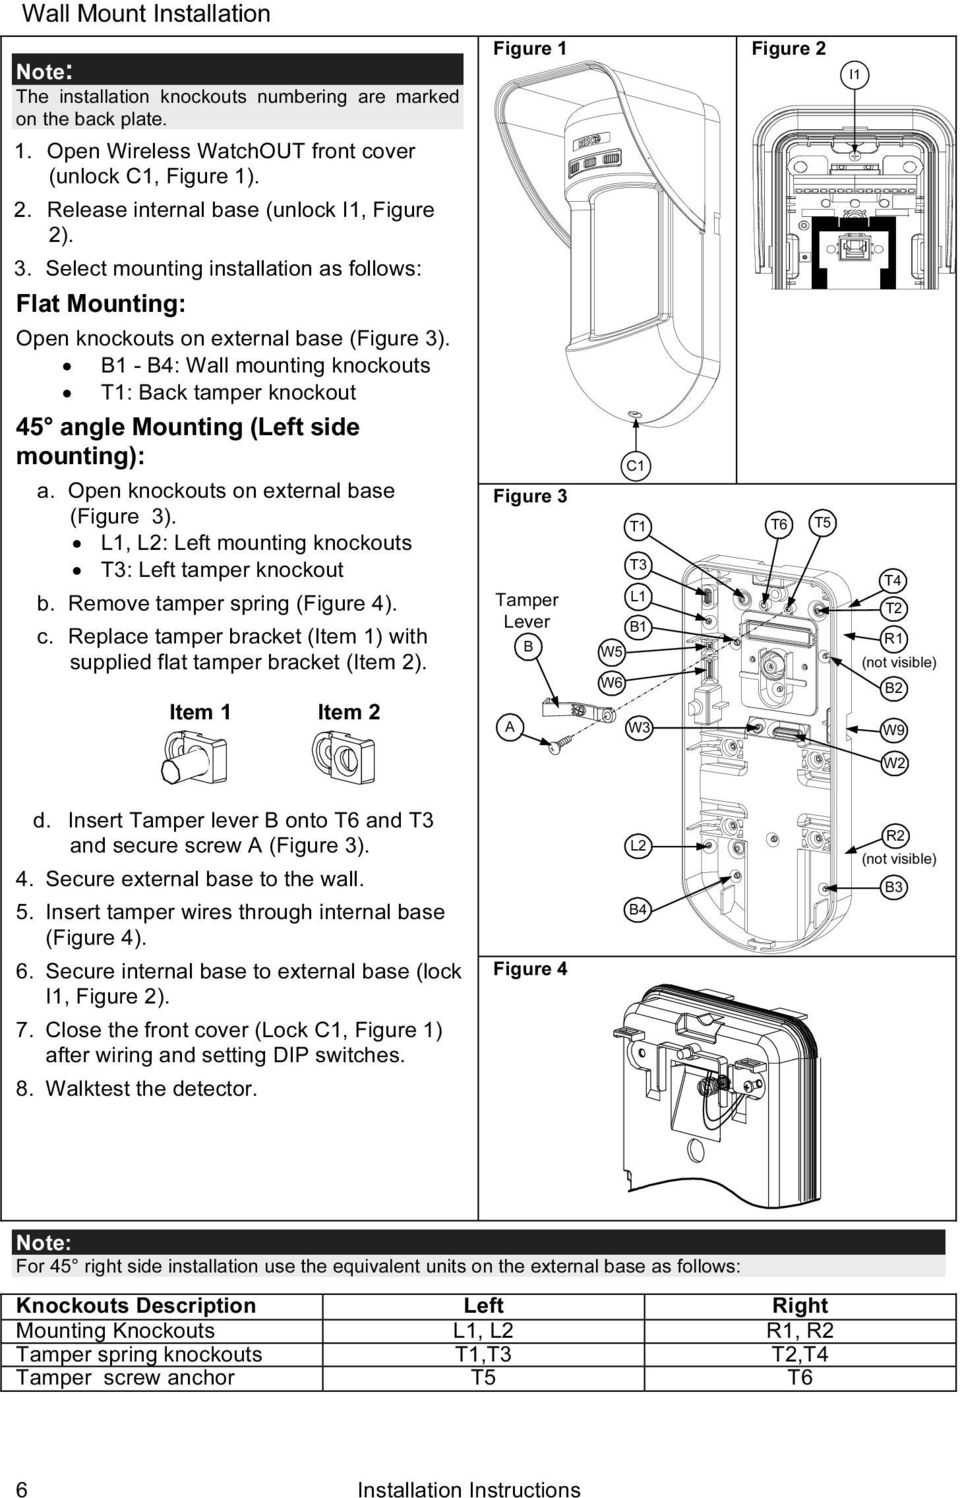 B - B4: Wall mounting knockouts T: Back tamper knockout 45 angle Mounting (Left side mounting): a. Open knockouts on external base (Figure 3).